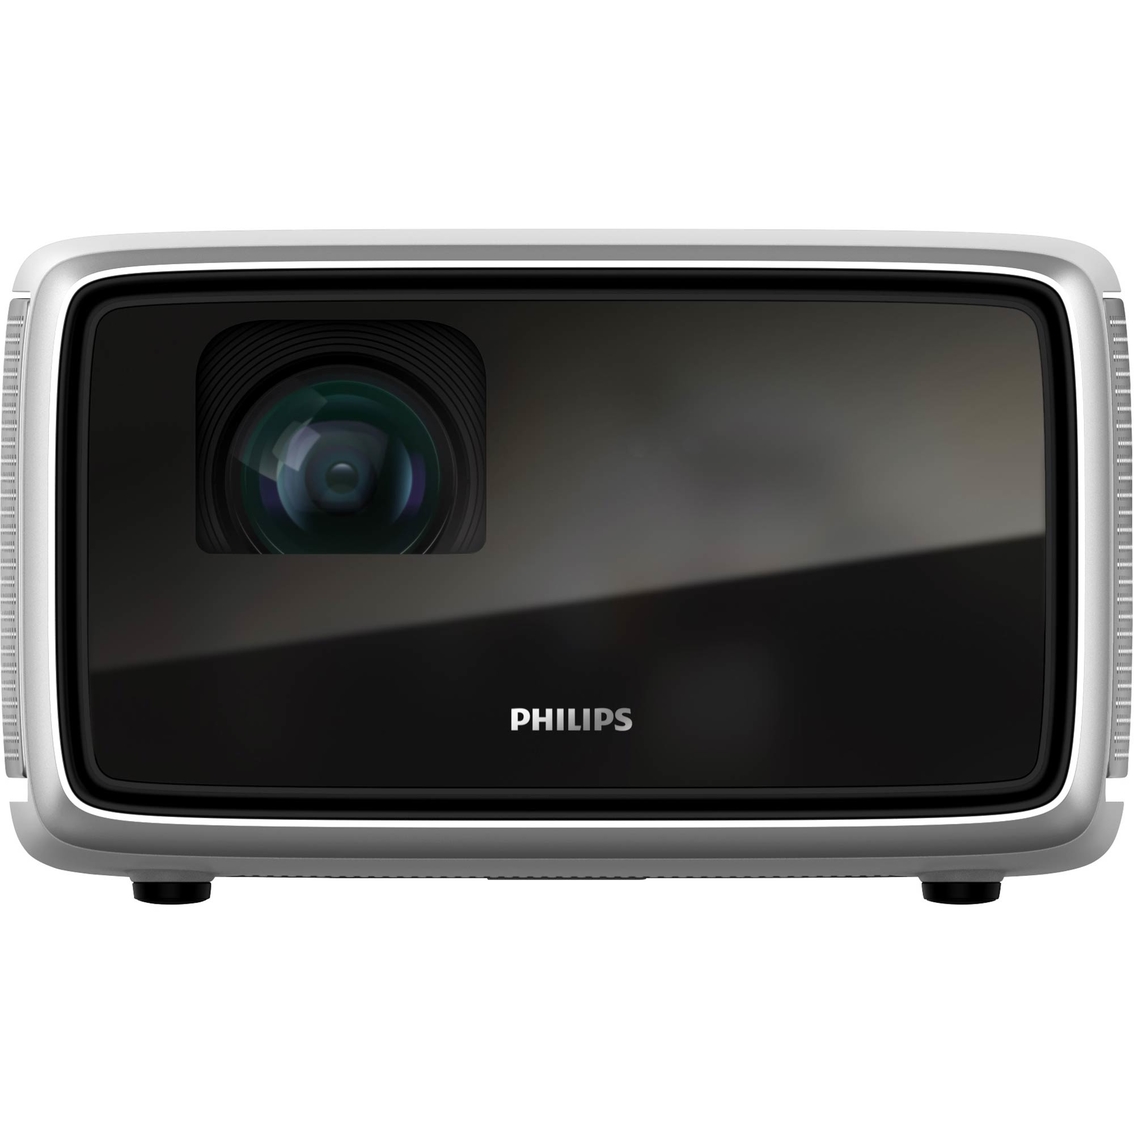 Philips Screeneo S4 Home Projector - Image 4 of 8